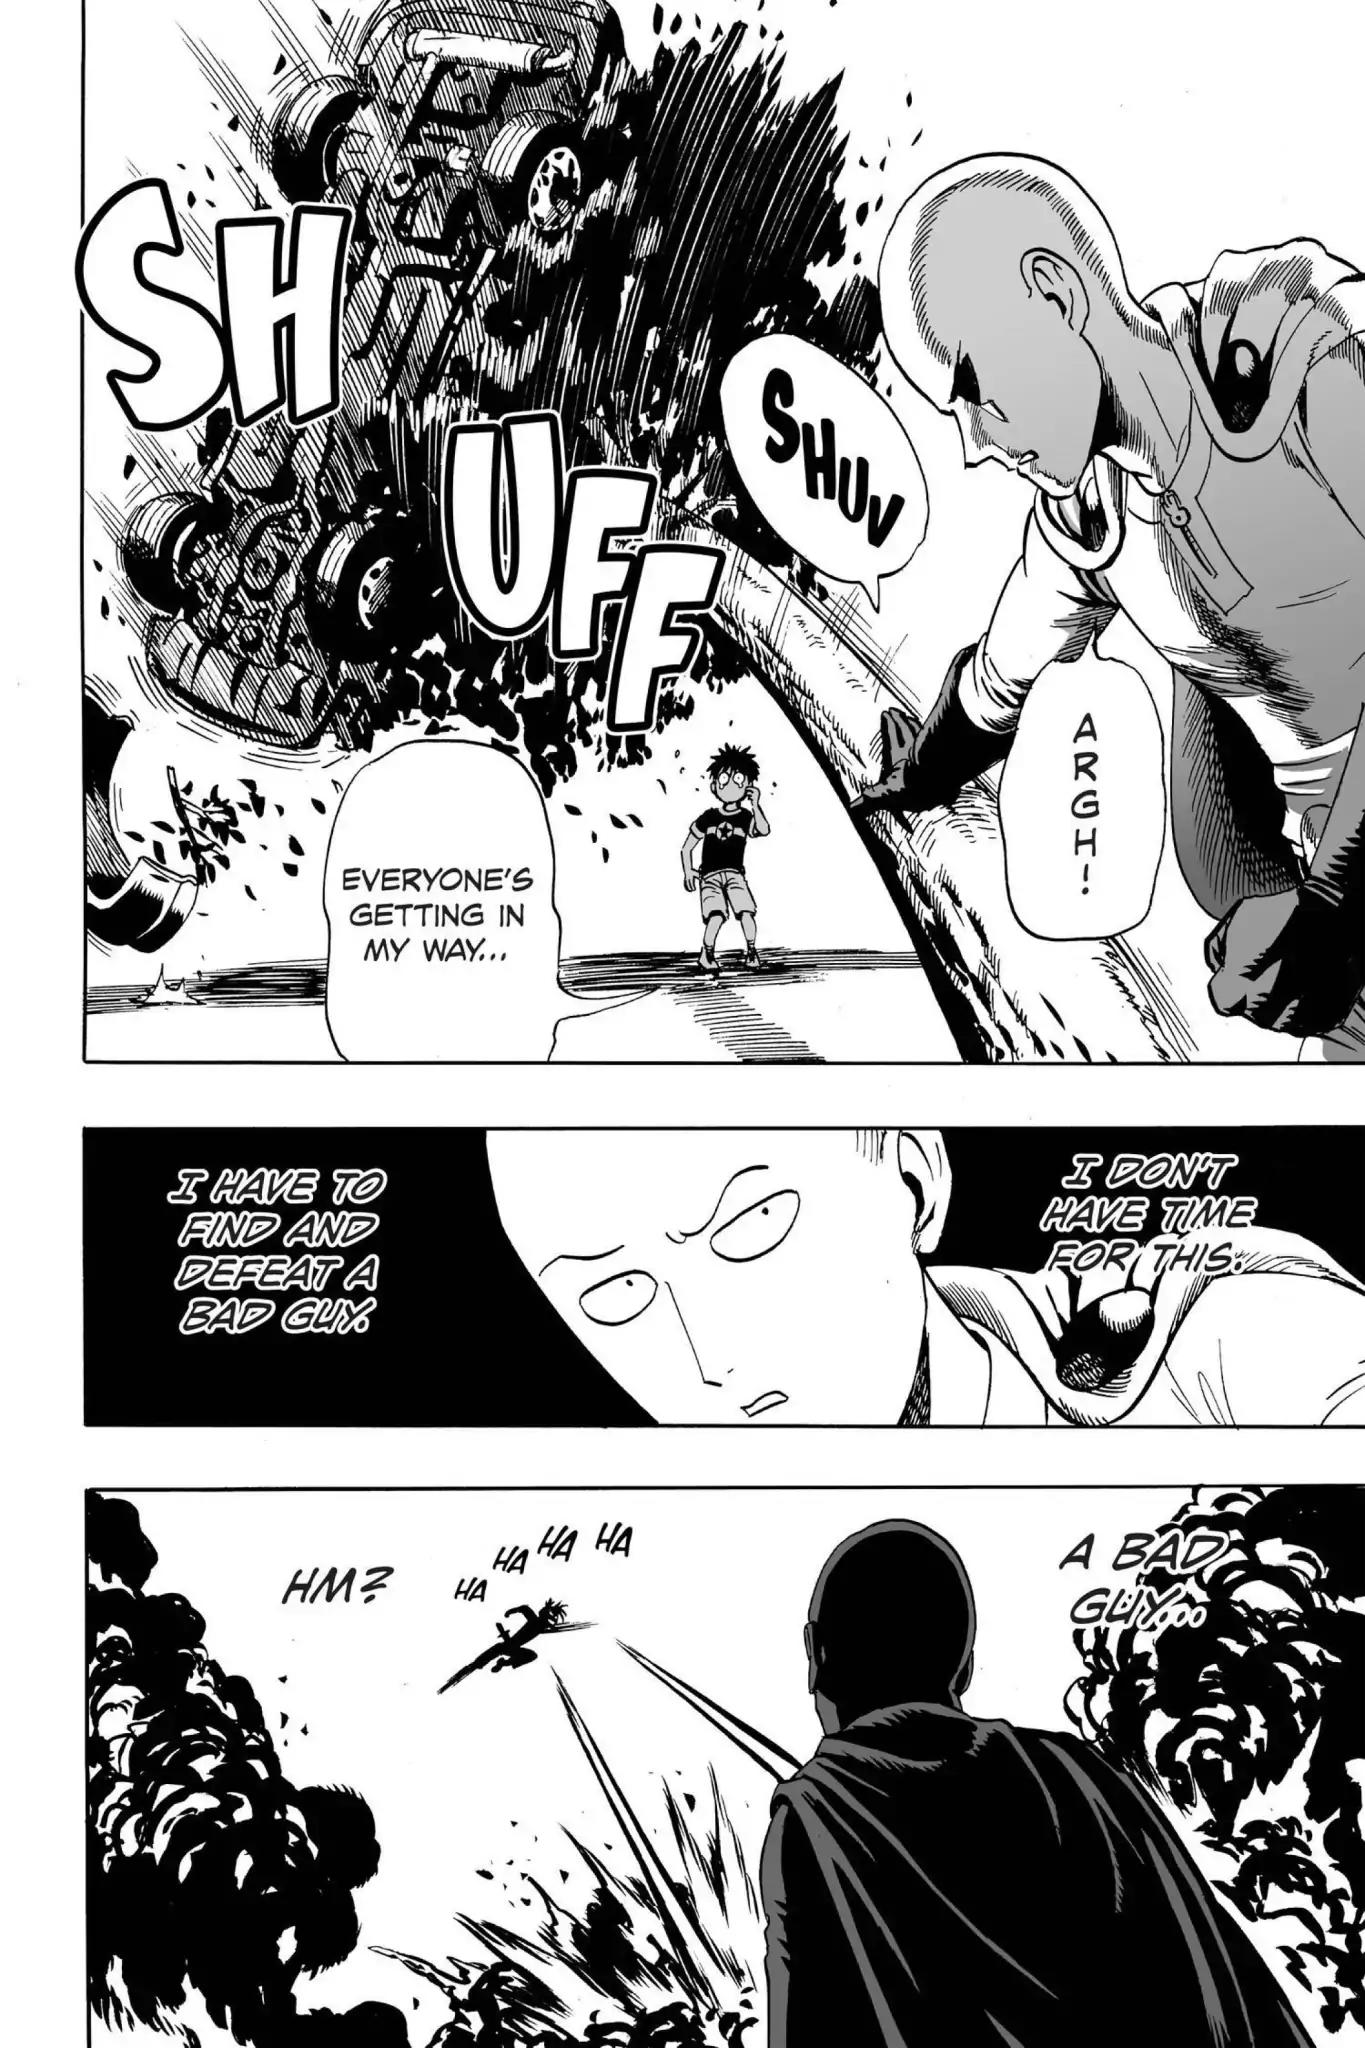 One Punch Man, Chapter 19 No Time For This image 23